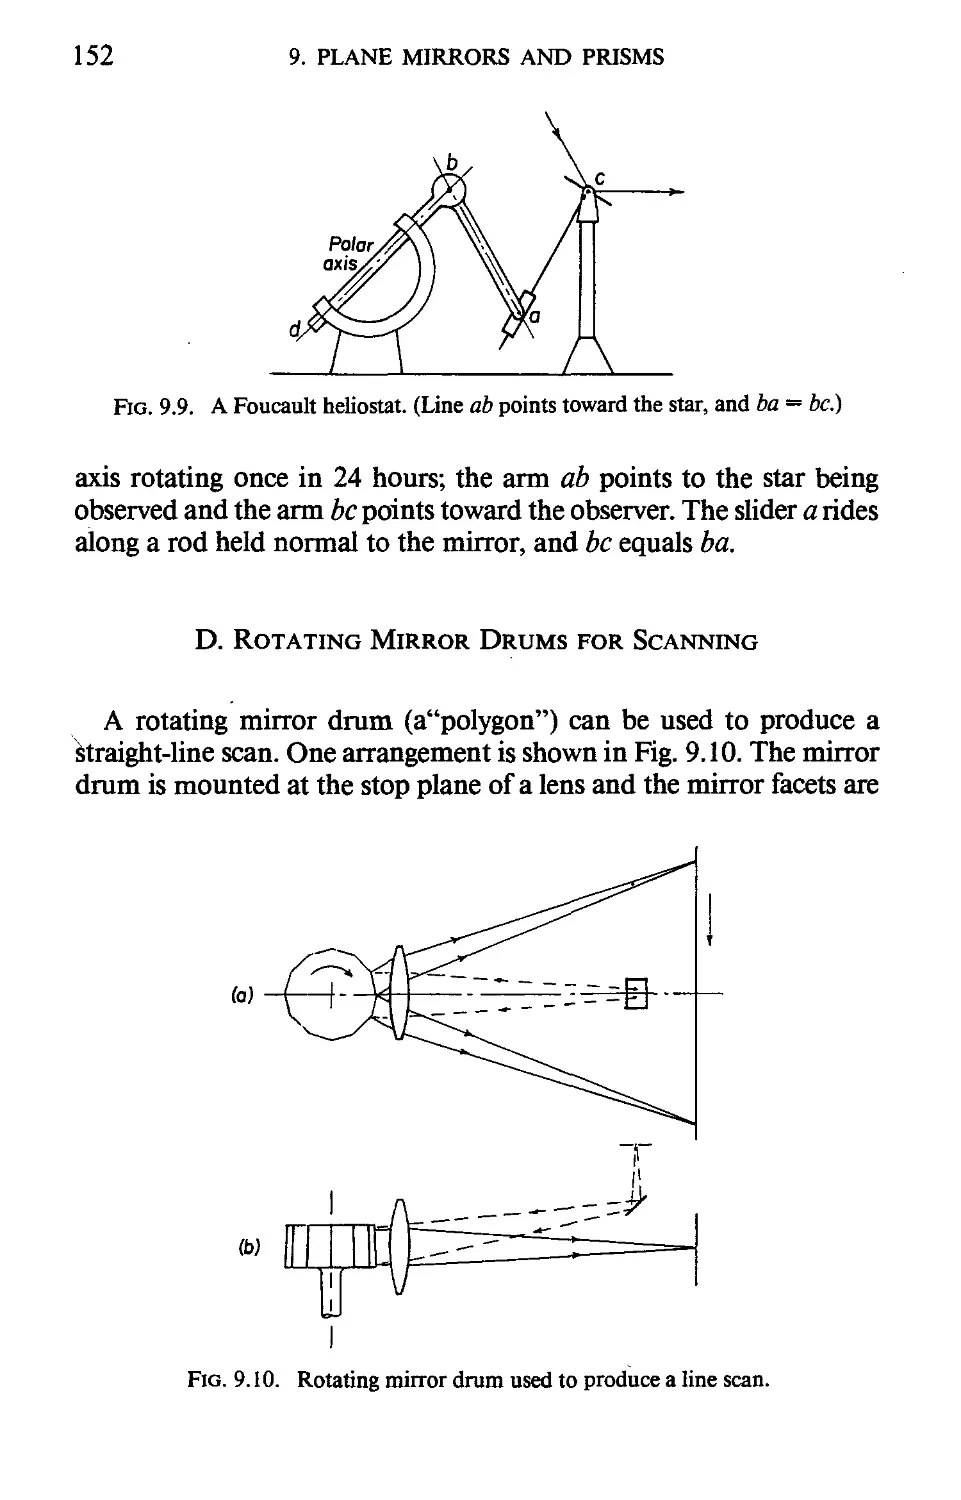 D. Rotating Mirror Drums for Scanning